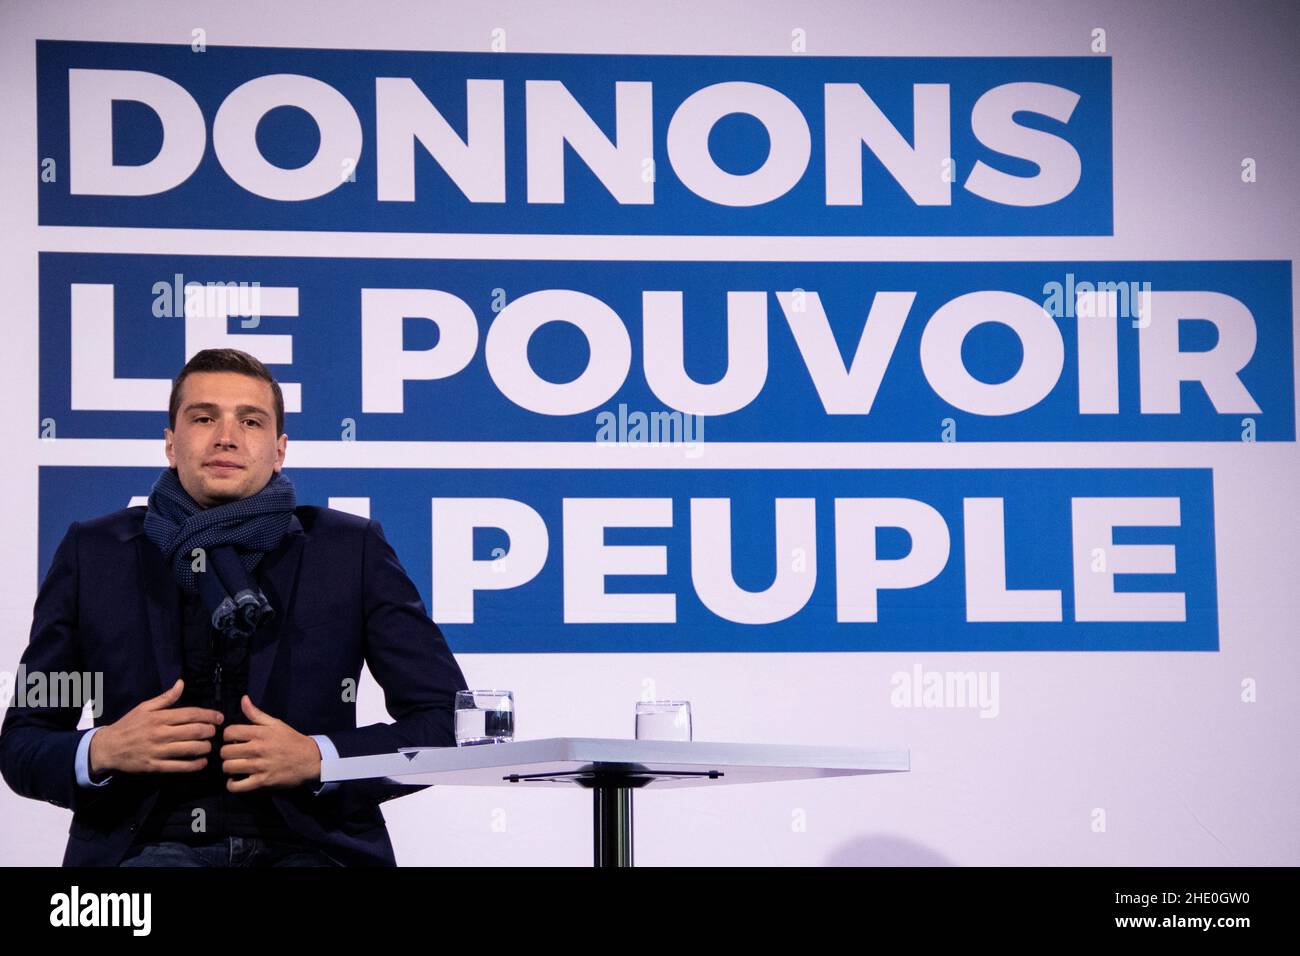 Jordan Bardella is a French politician who has served as a spokesman of the National Rally since September 2017. He was the lead candidate of the National Rally in the 2019 European Parliament election in France. Stock Photo